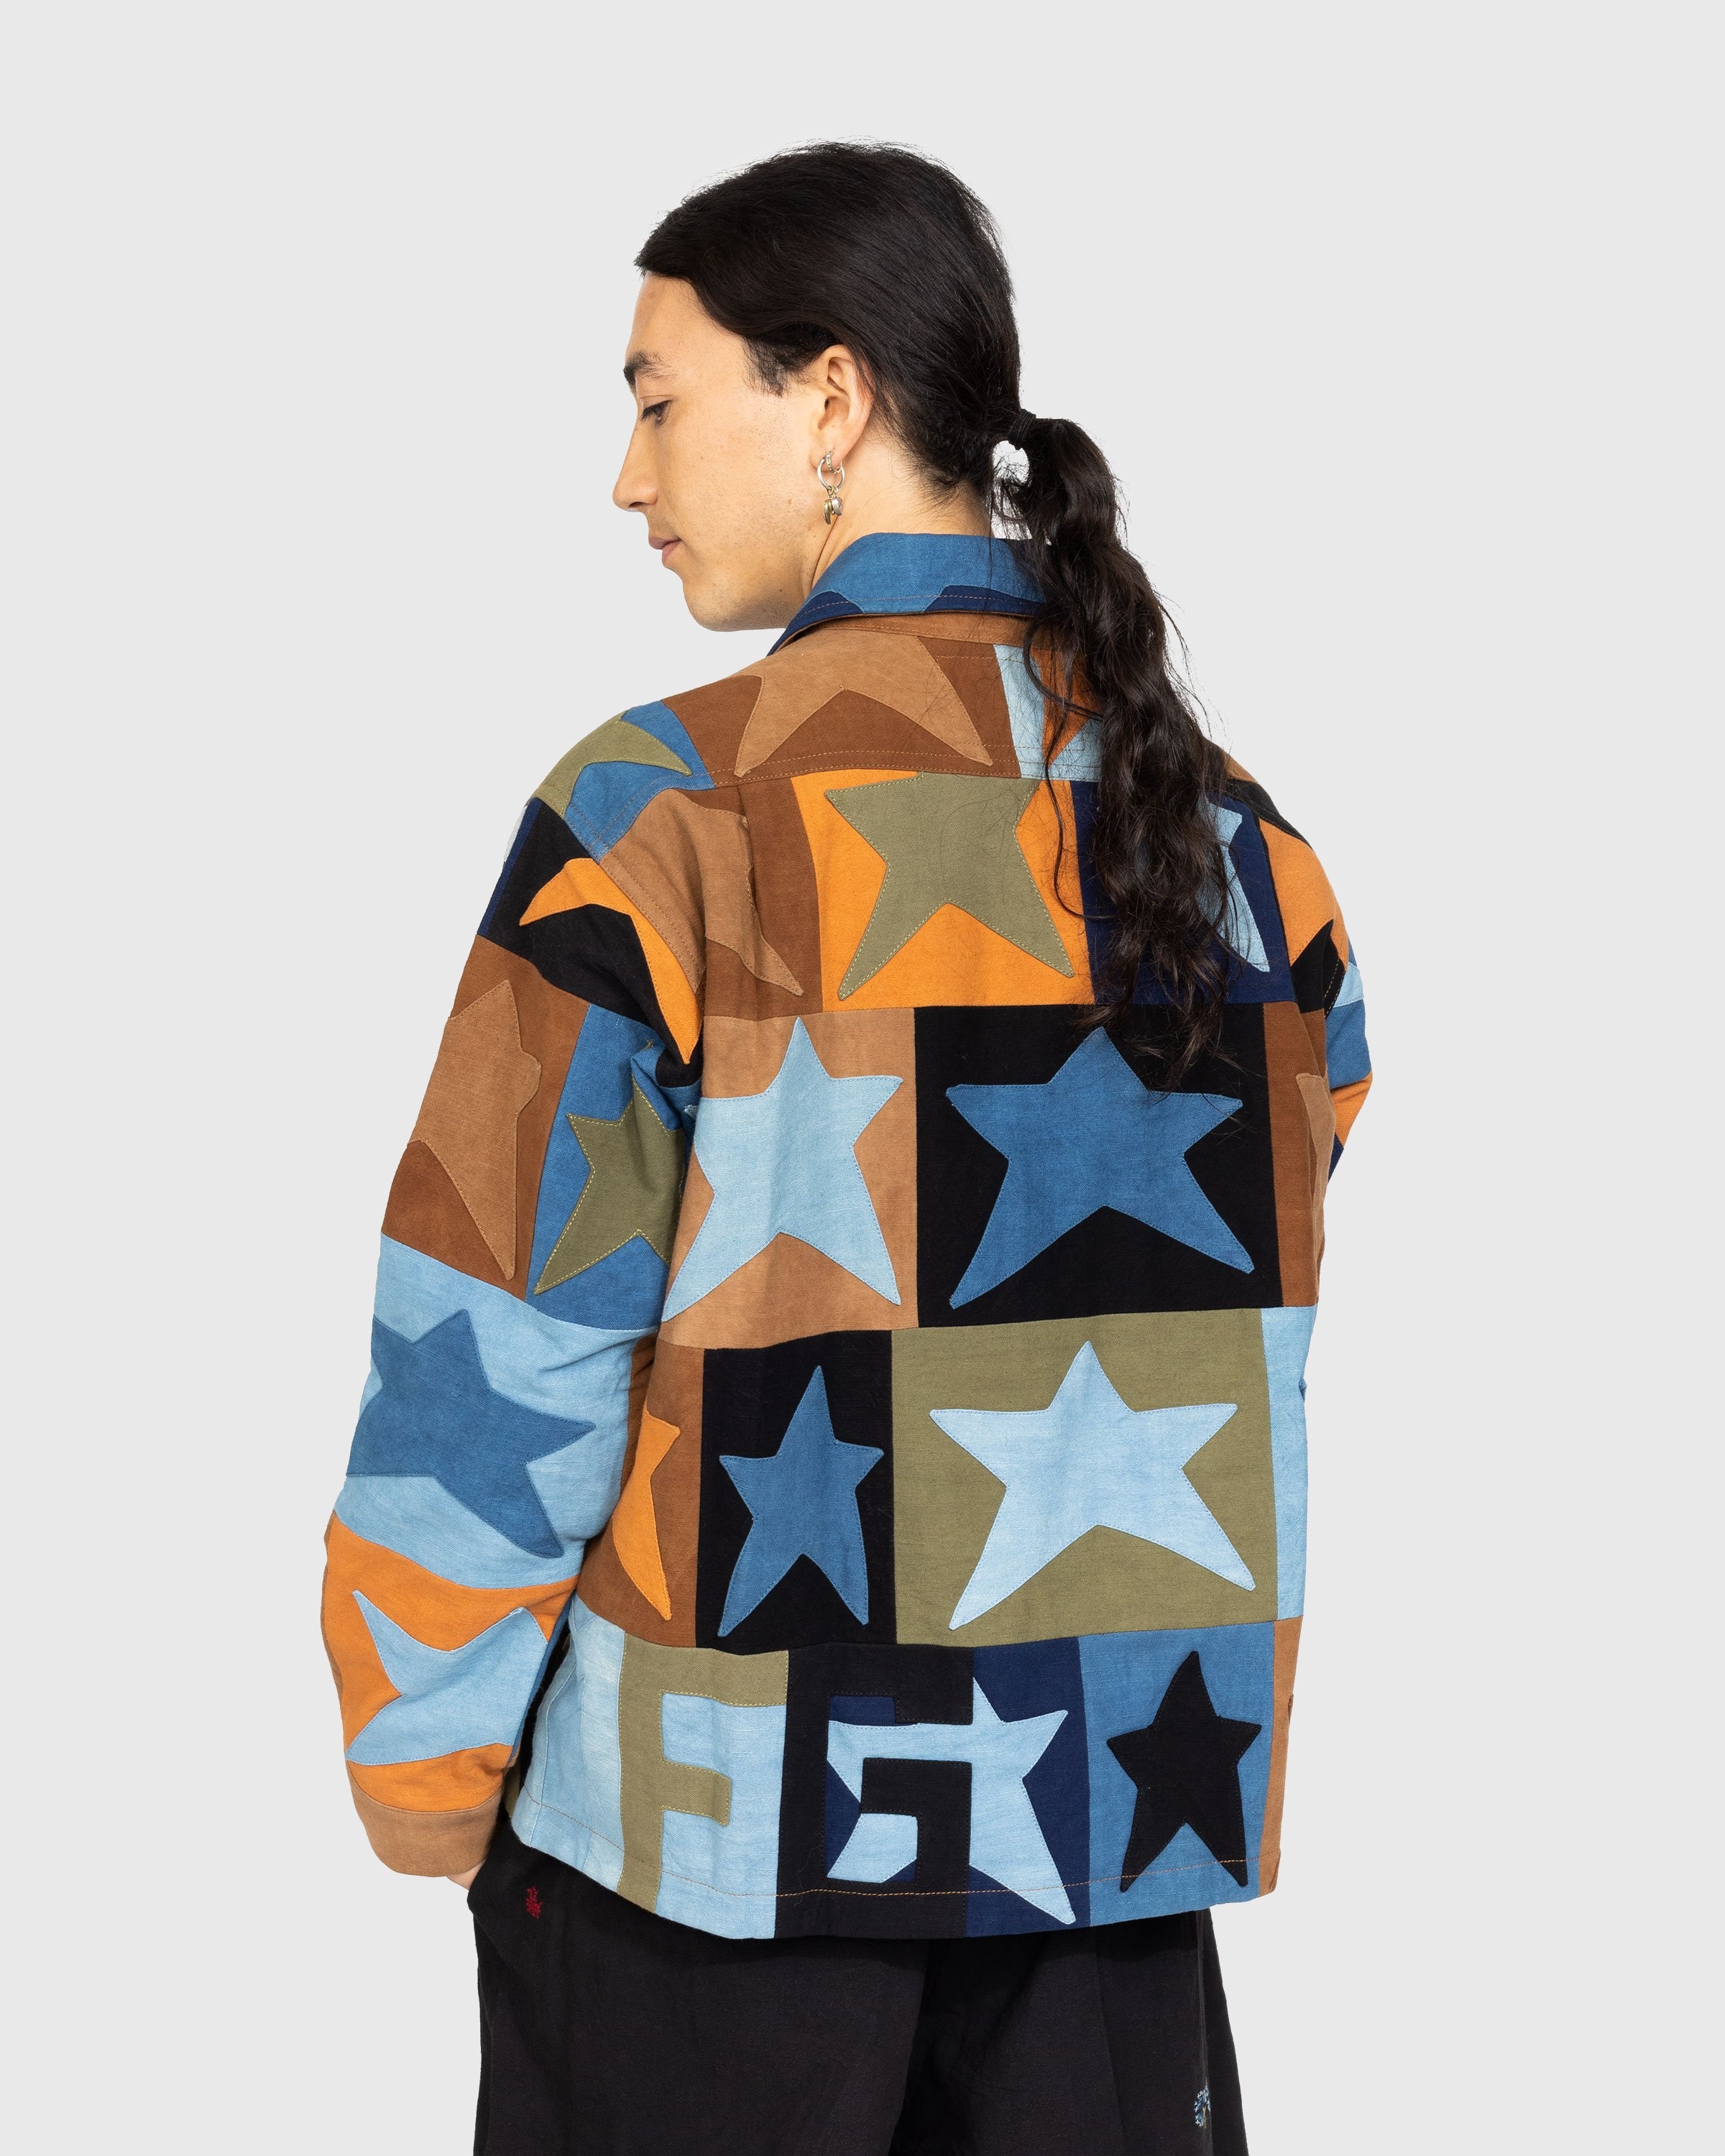 Story mfg. – Worf Jacket Star Scraps Patchwork - Outerwear - Multi - Image 3